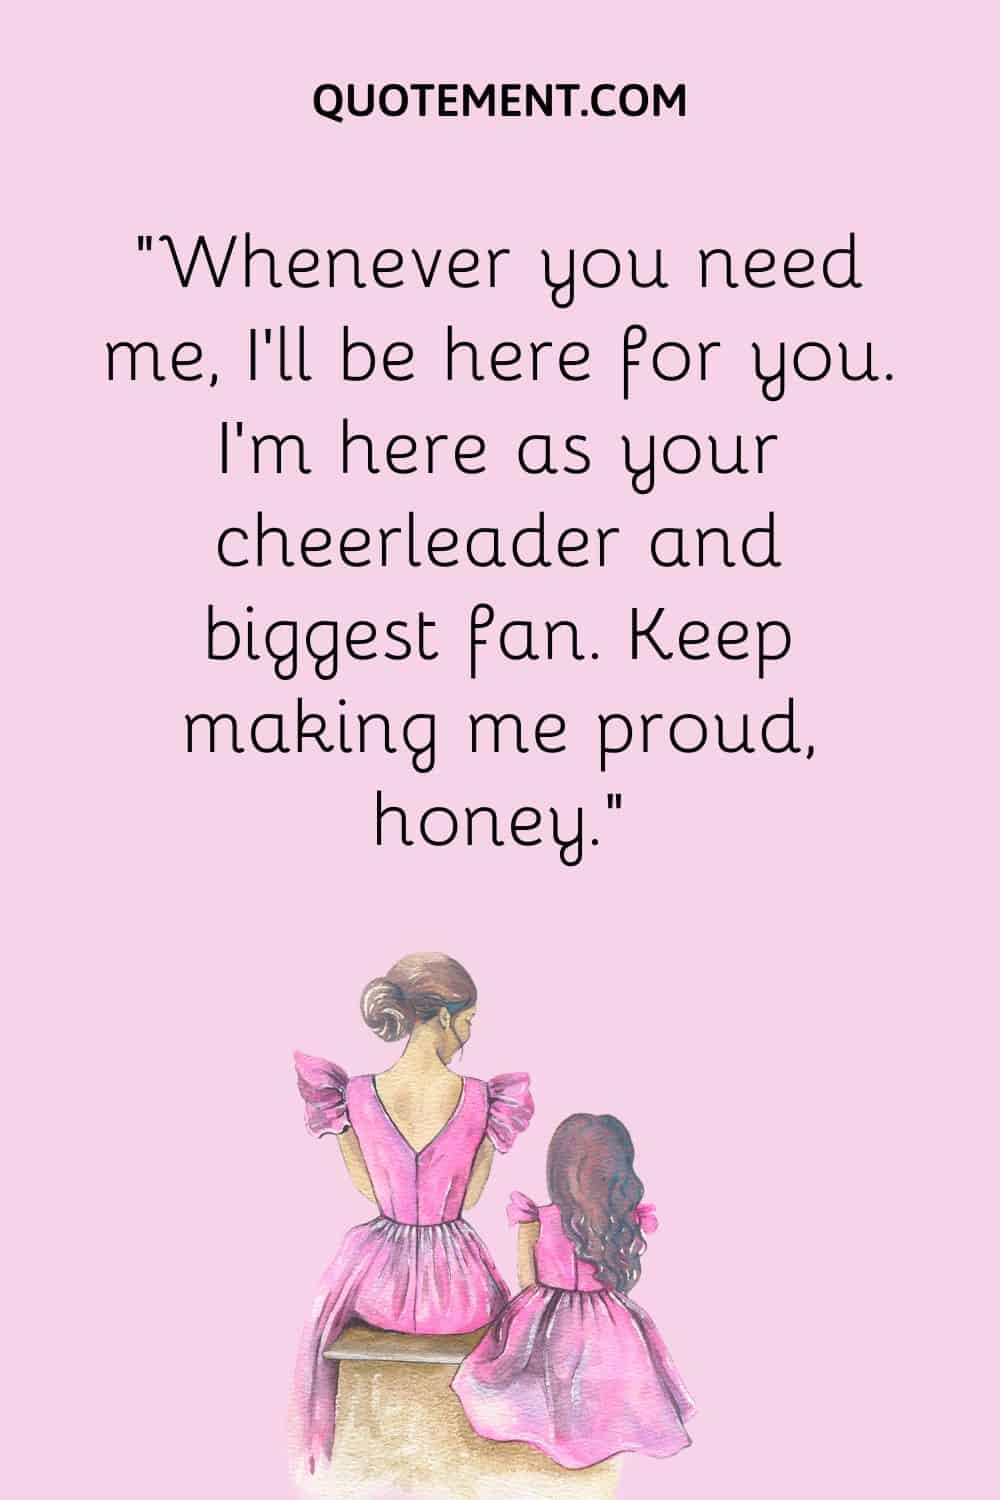 “Whenever you need me, I’ll be here for you. I’m here as your cheerleader and biggest fan. Keep making me proud, honey.”